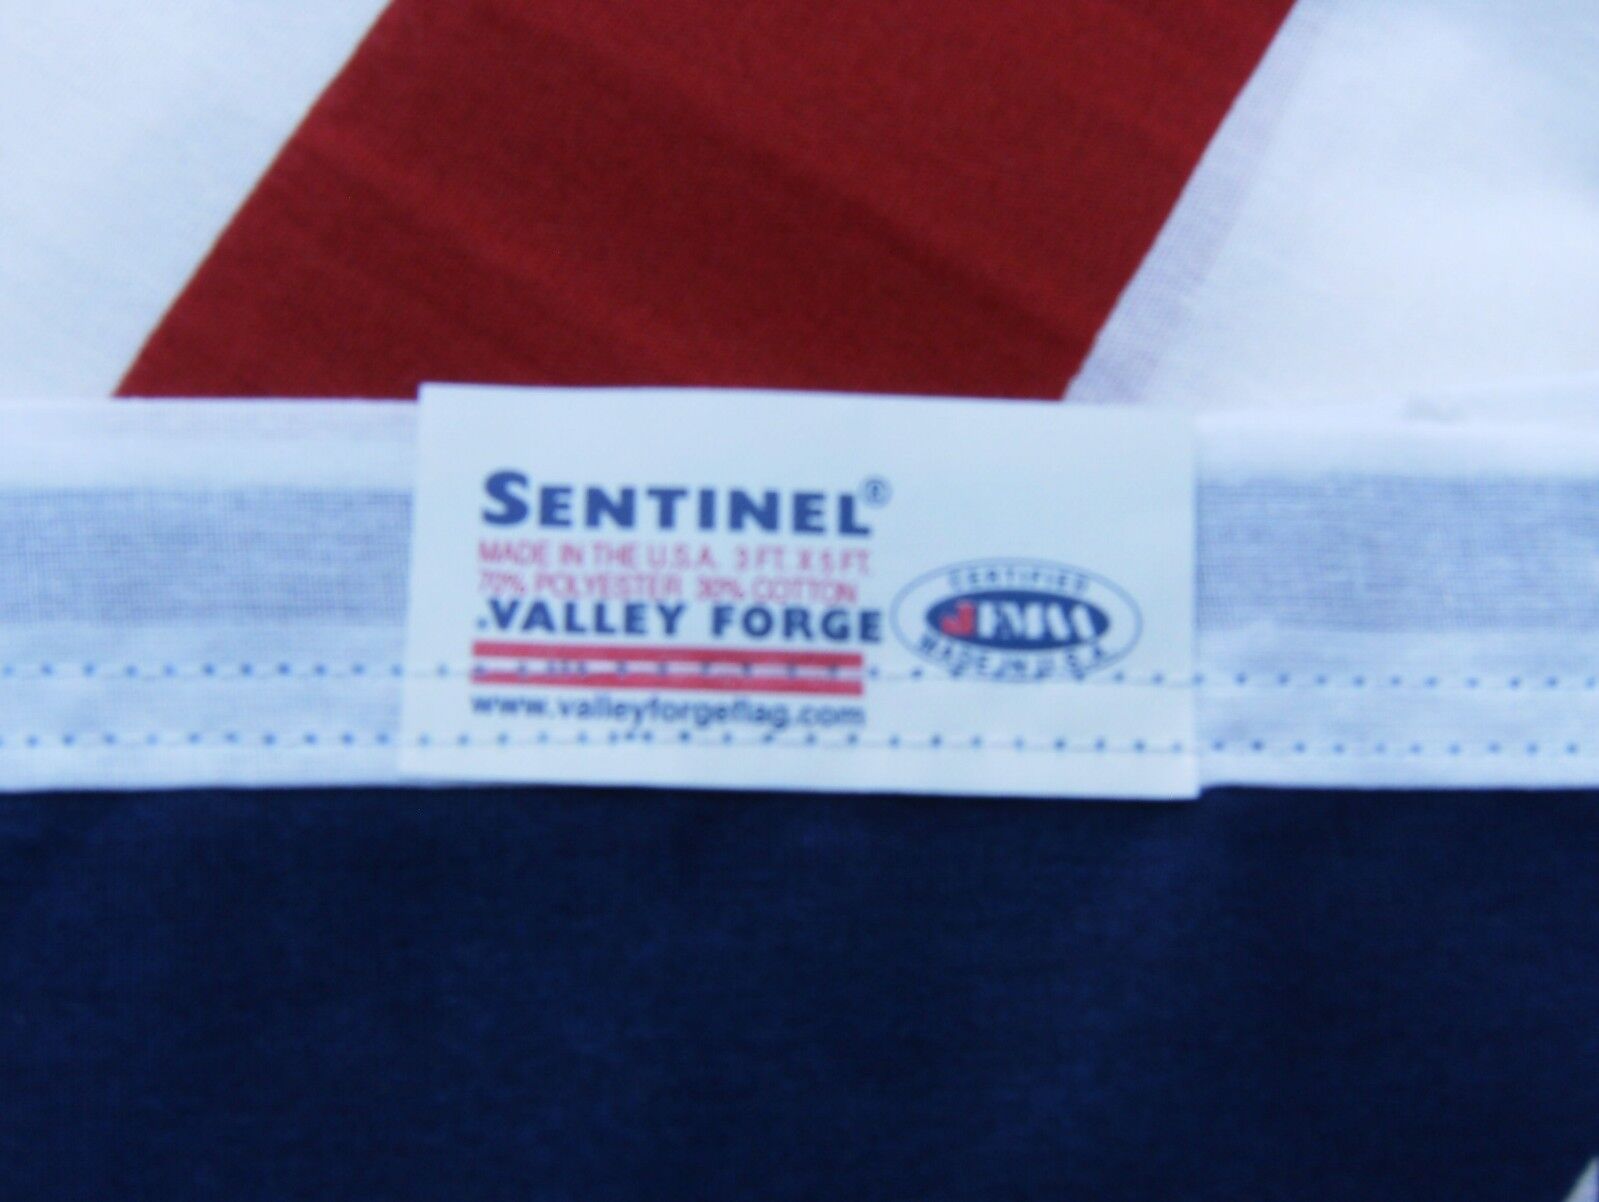 Valley Forge US American Flag 3'x5' PRINTED Poly/Cotton 100% Made in the USA Без бренда - фотография #3